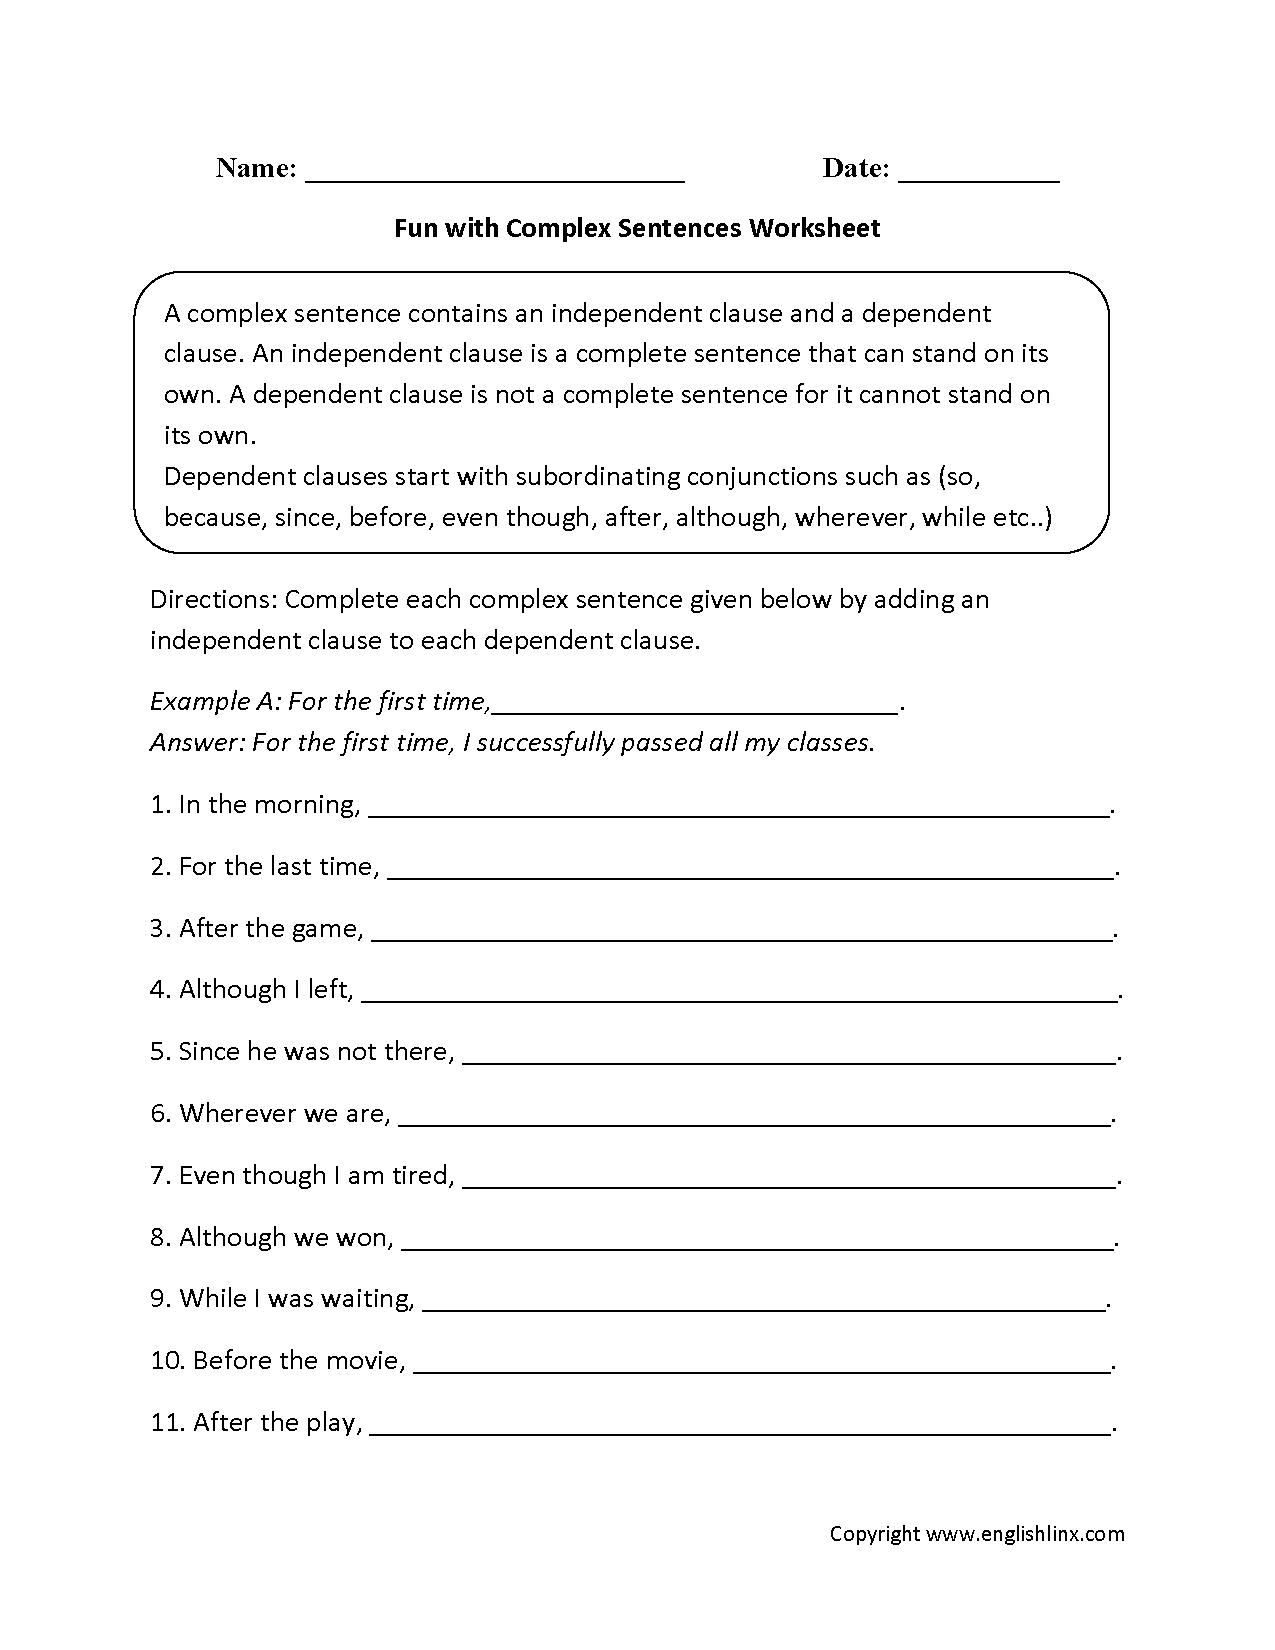 Fun With Complex Sentences Worksheet | Sentence Structure | Common - Free Printable Worksheets On Simple Compound And Complex Sentences